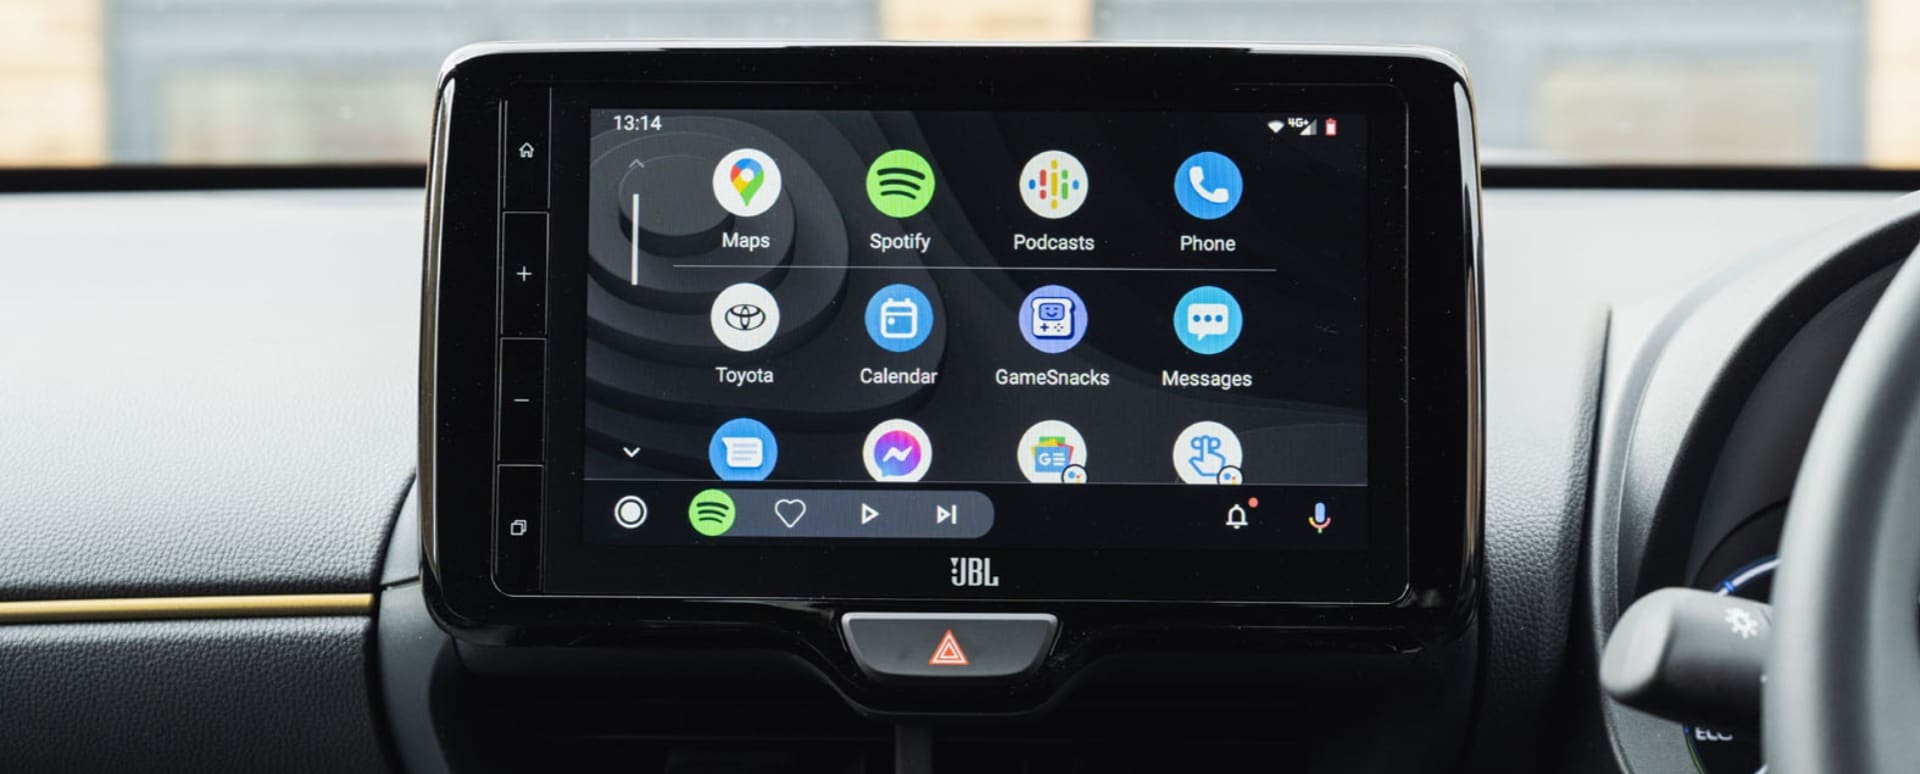 android-auto-features-compatibility-and-more